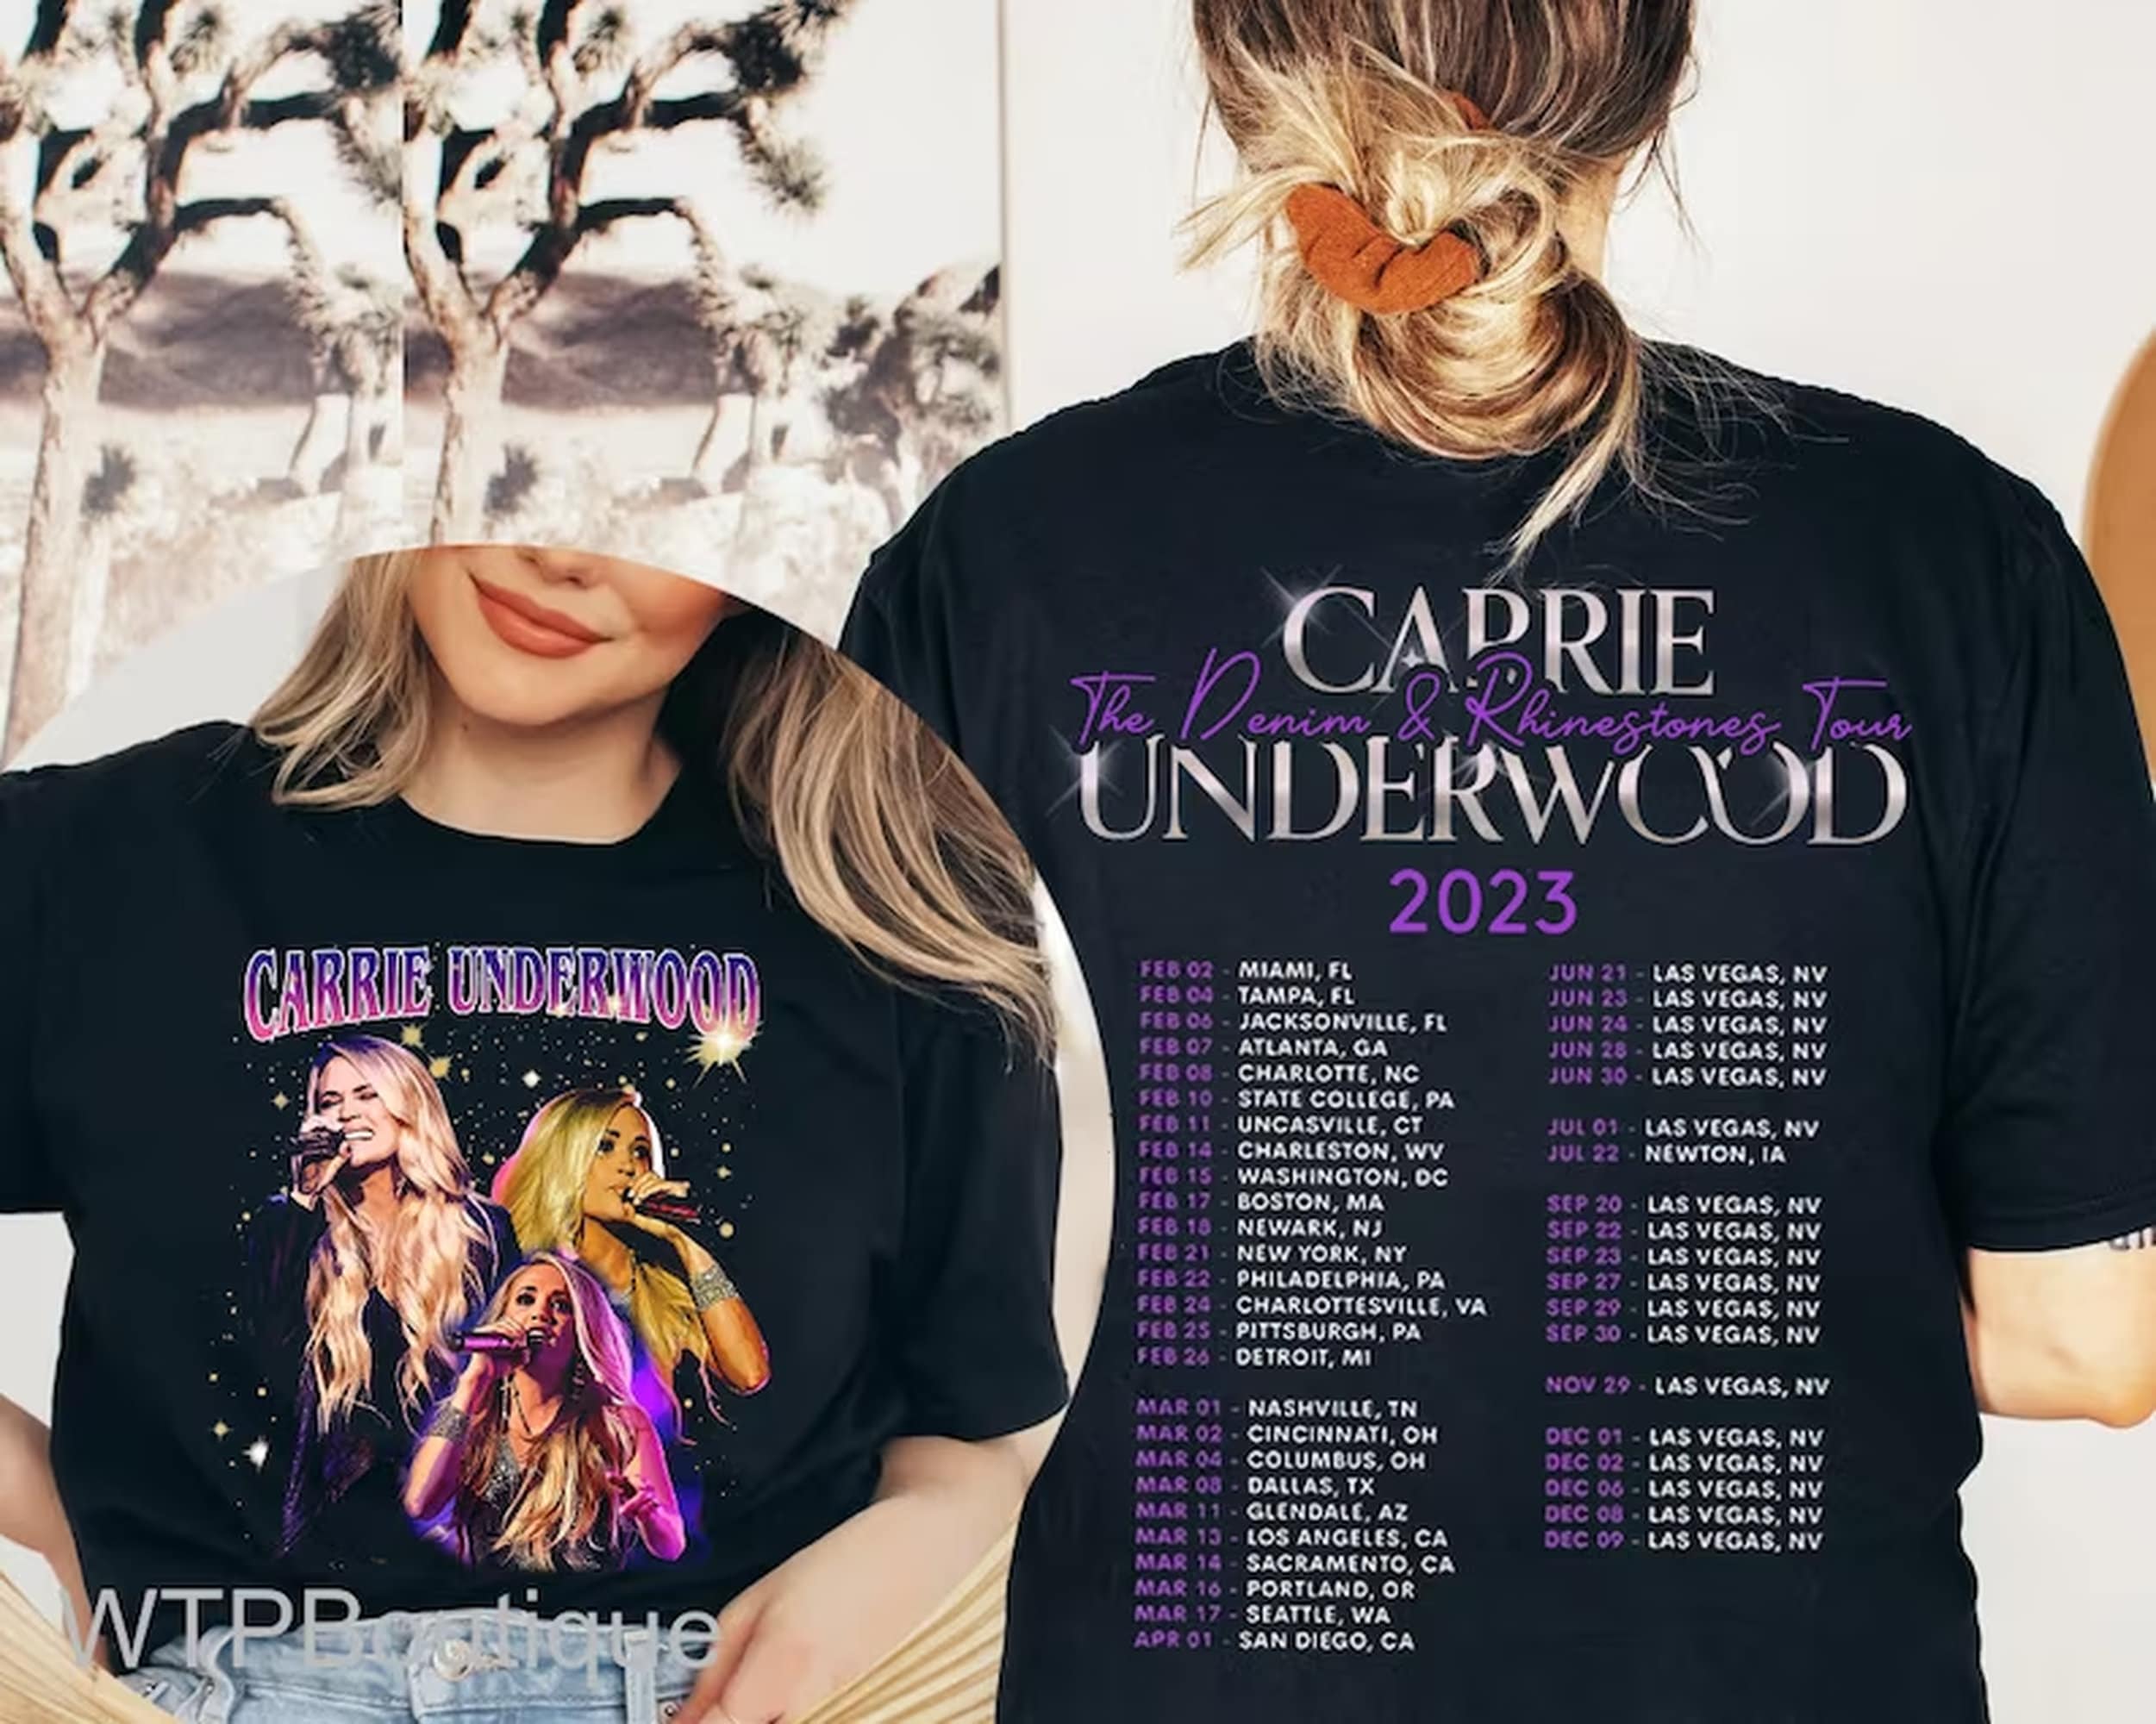 Carrie Underwood Denim and Rhinestones Tour 2023 Double Sided T Shirt